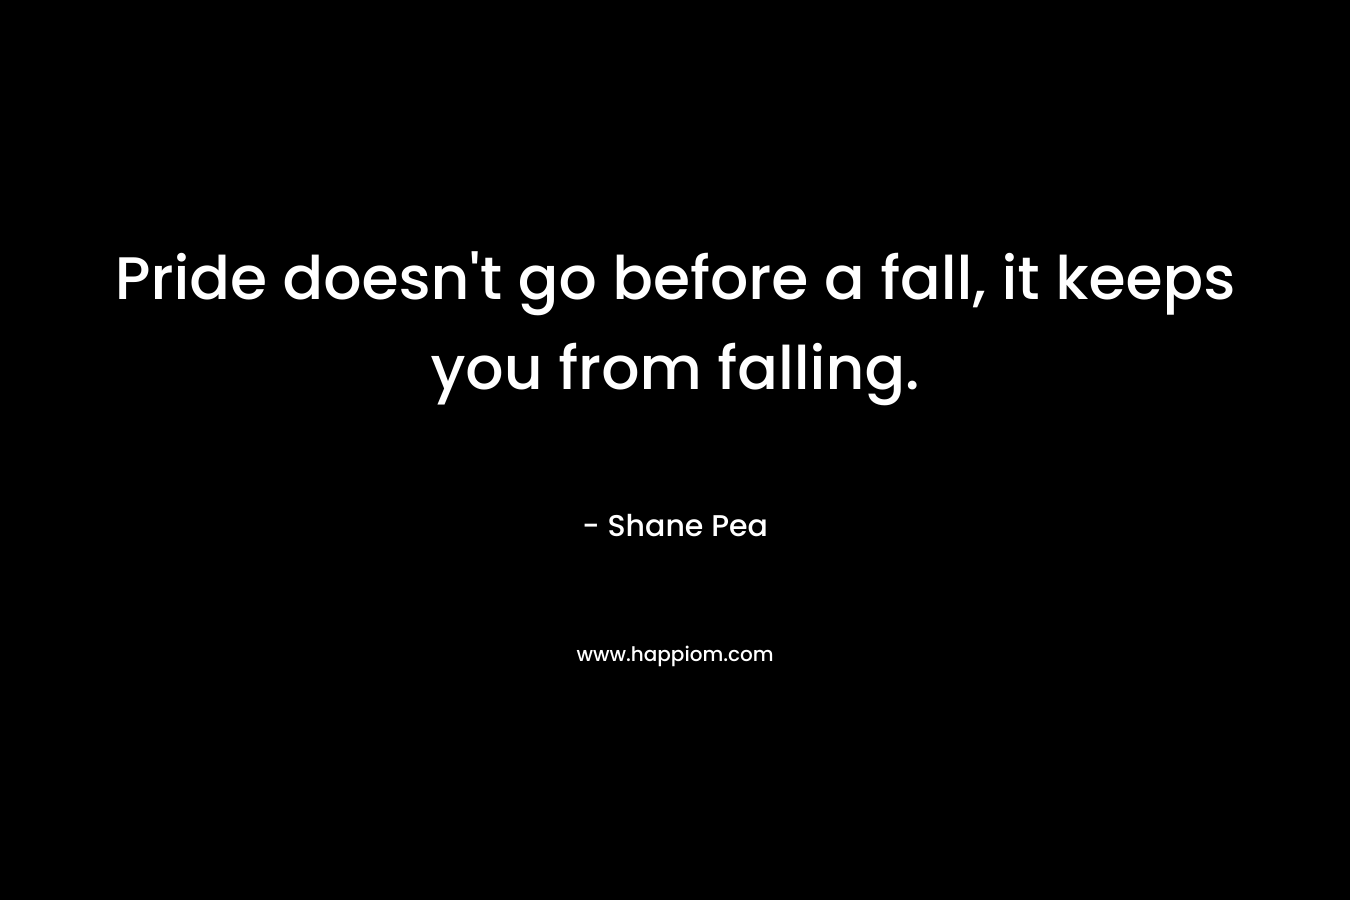 Pride doesn't go before a fall, it keeps you from falling.